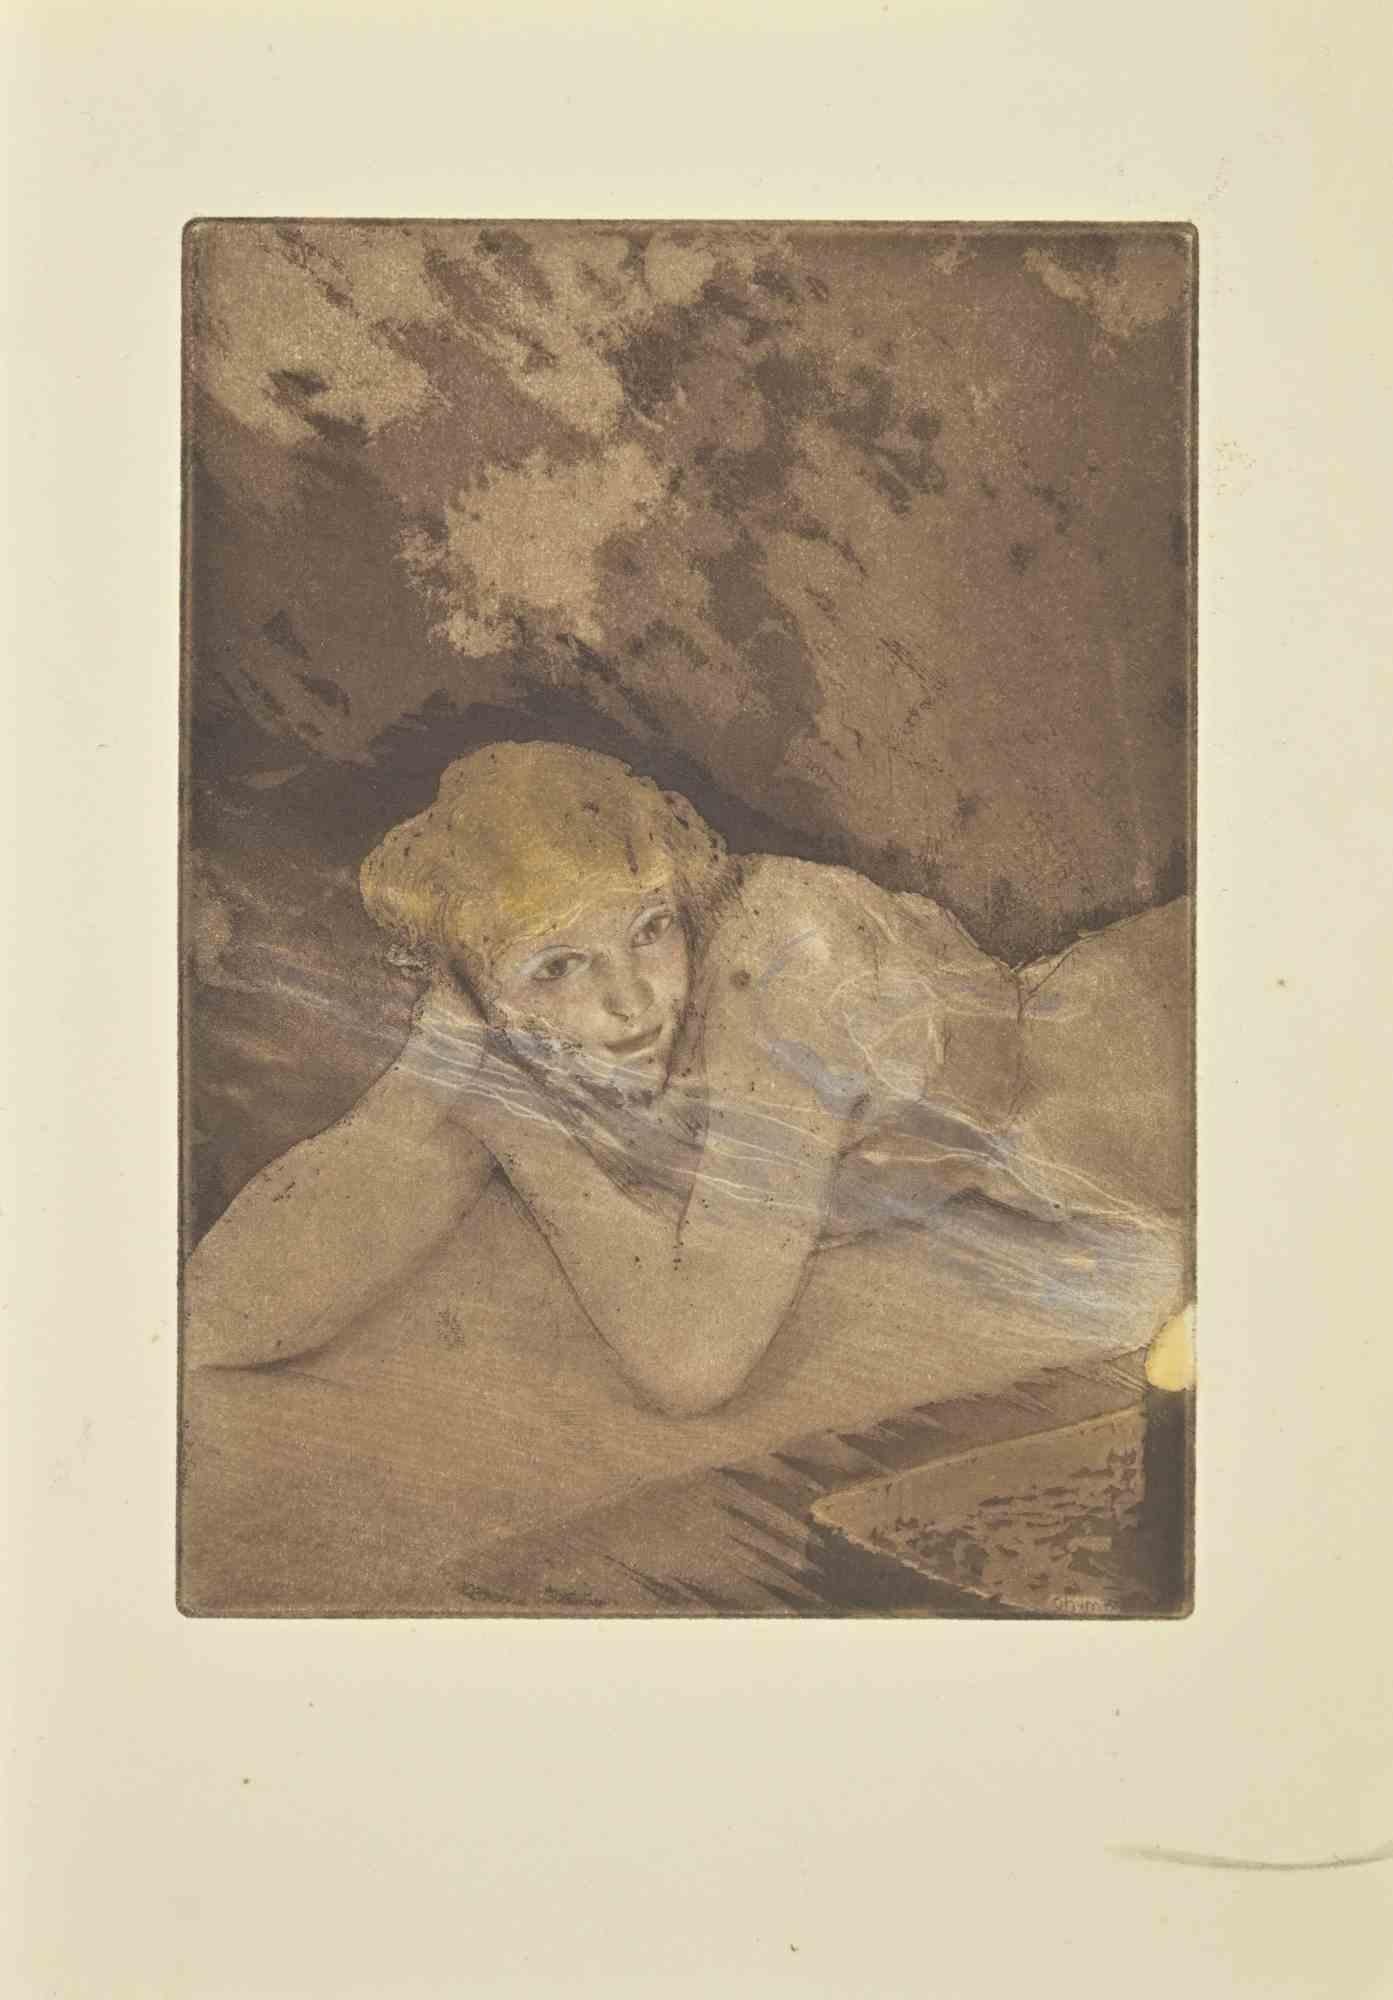 Nude on the bed is an etching realized by Edouard Chimot in the 1930s.

Signed on the plate by the artist on the lower right corner.

Good conditions.

Édouard Chimot (26 November 1880 – 7 June 1959) was a French artist, illustrator, and editor